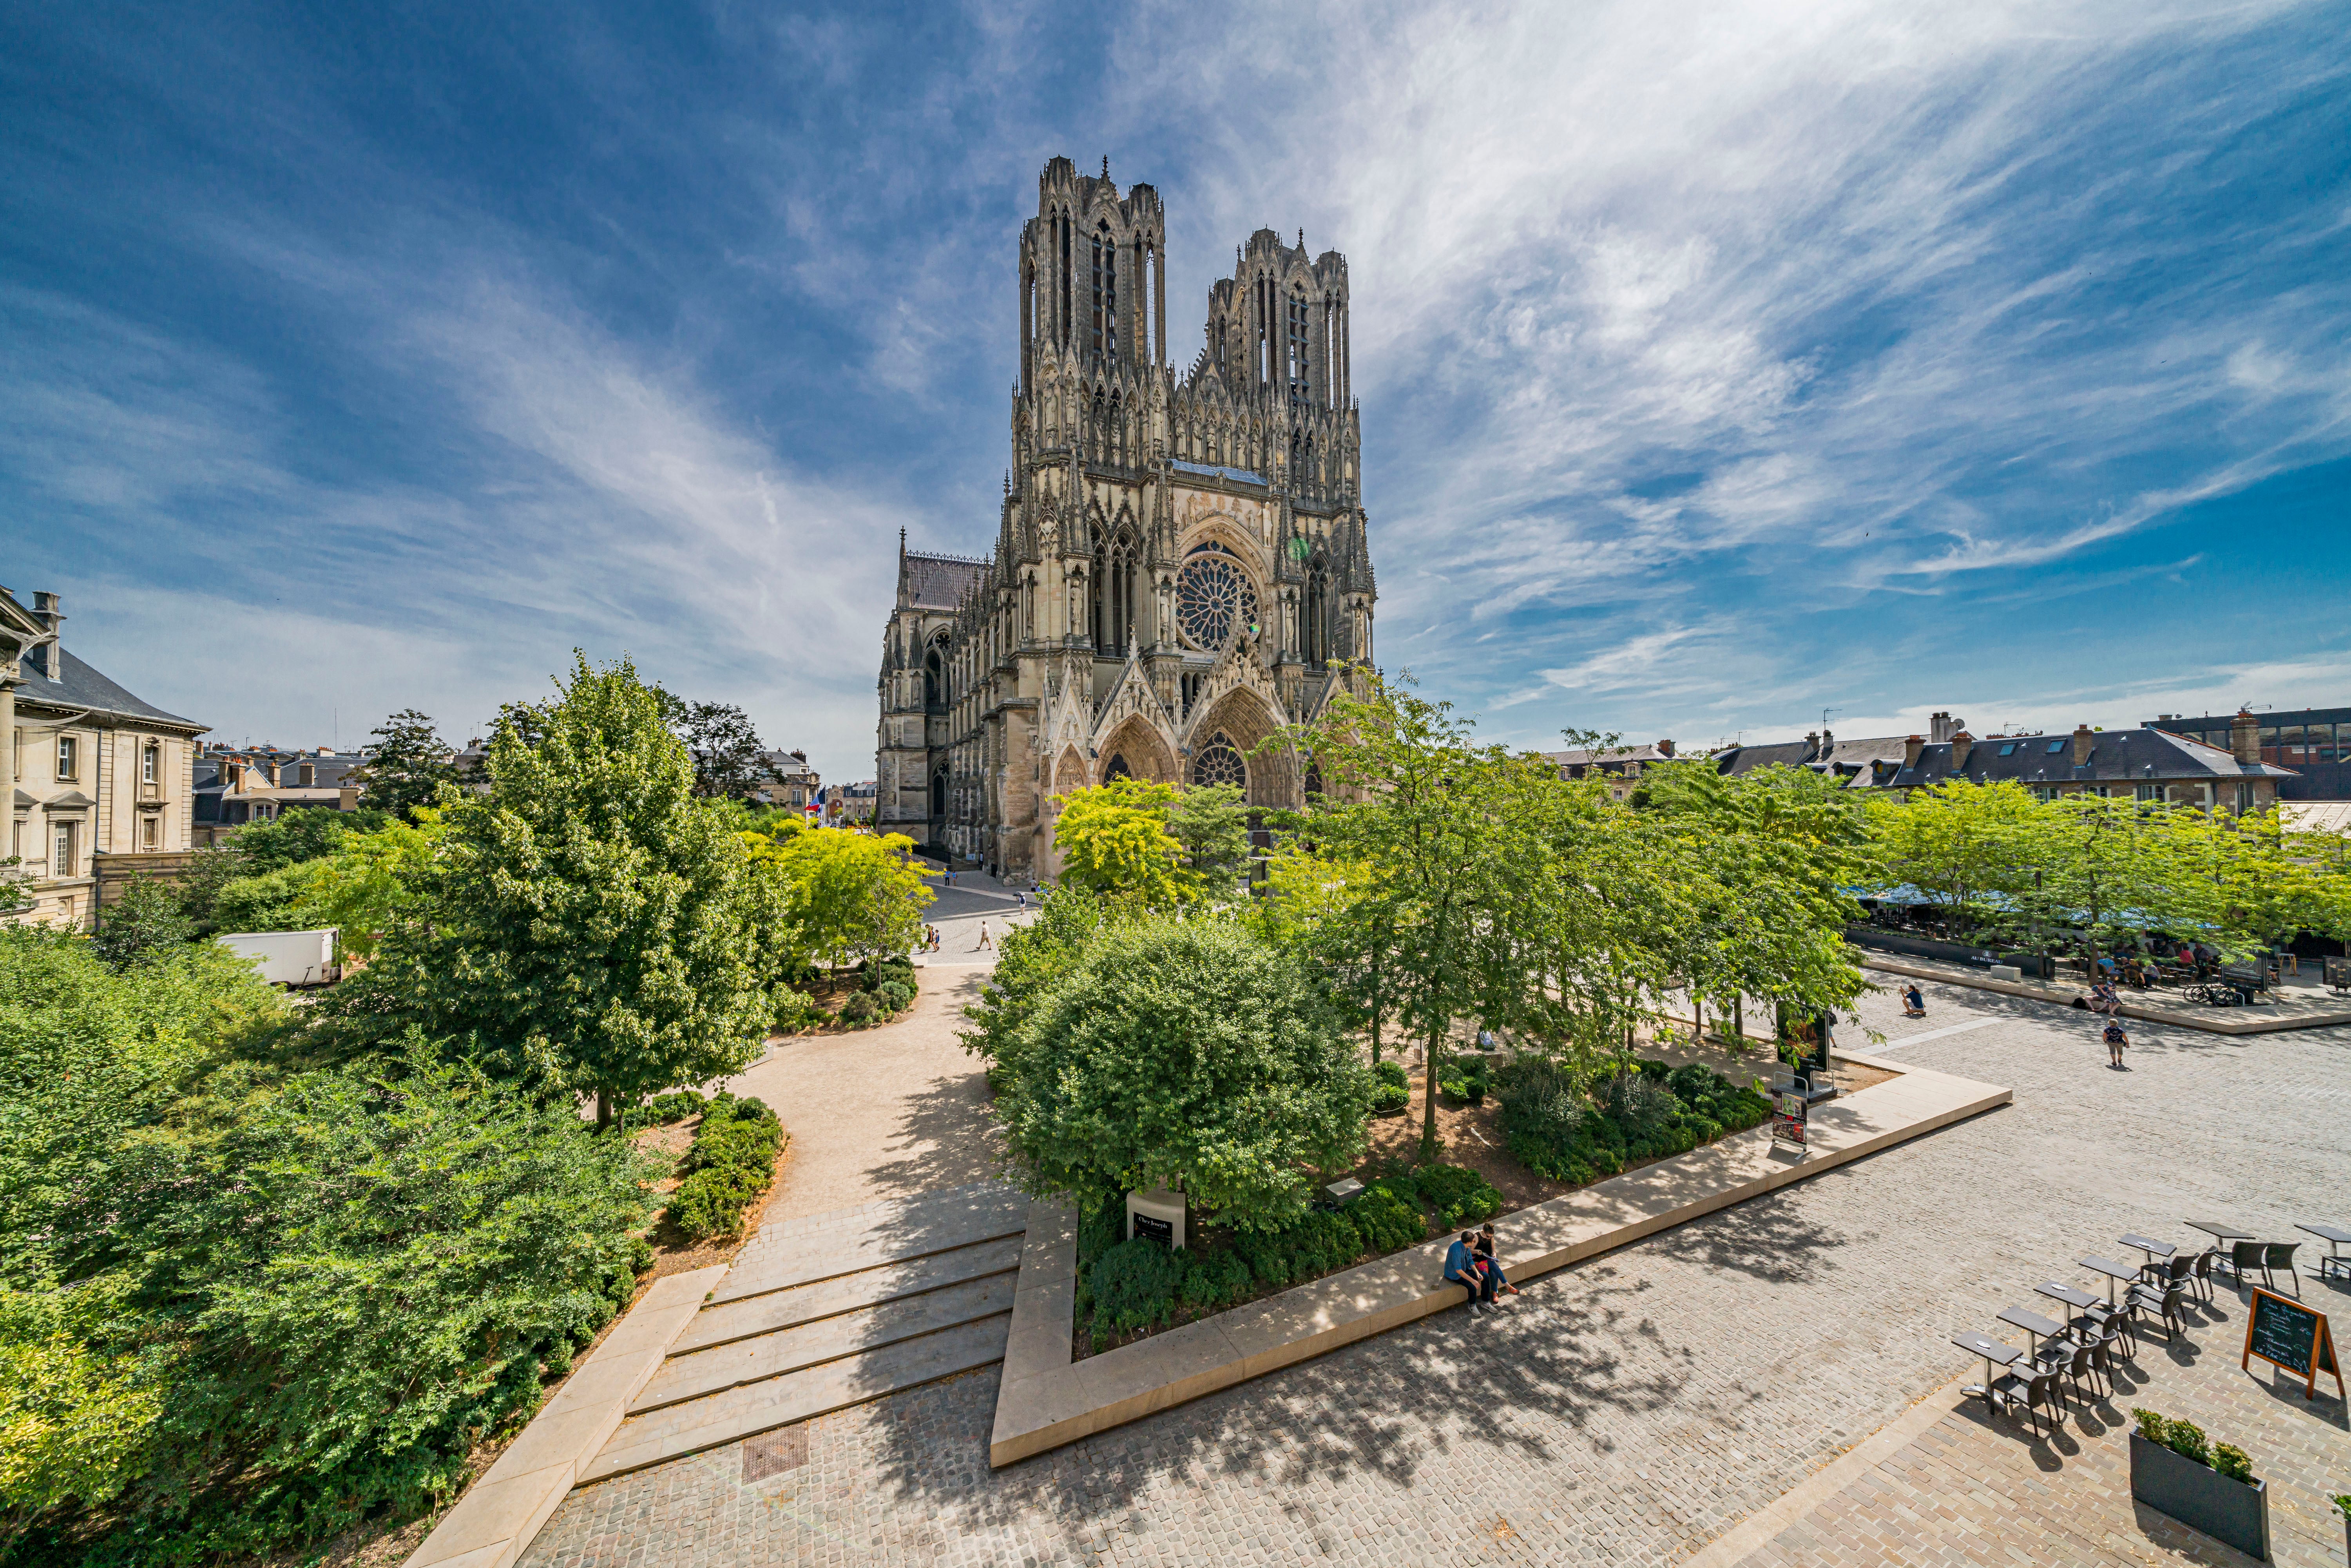 Reims’ handsome cathedral